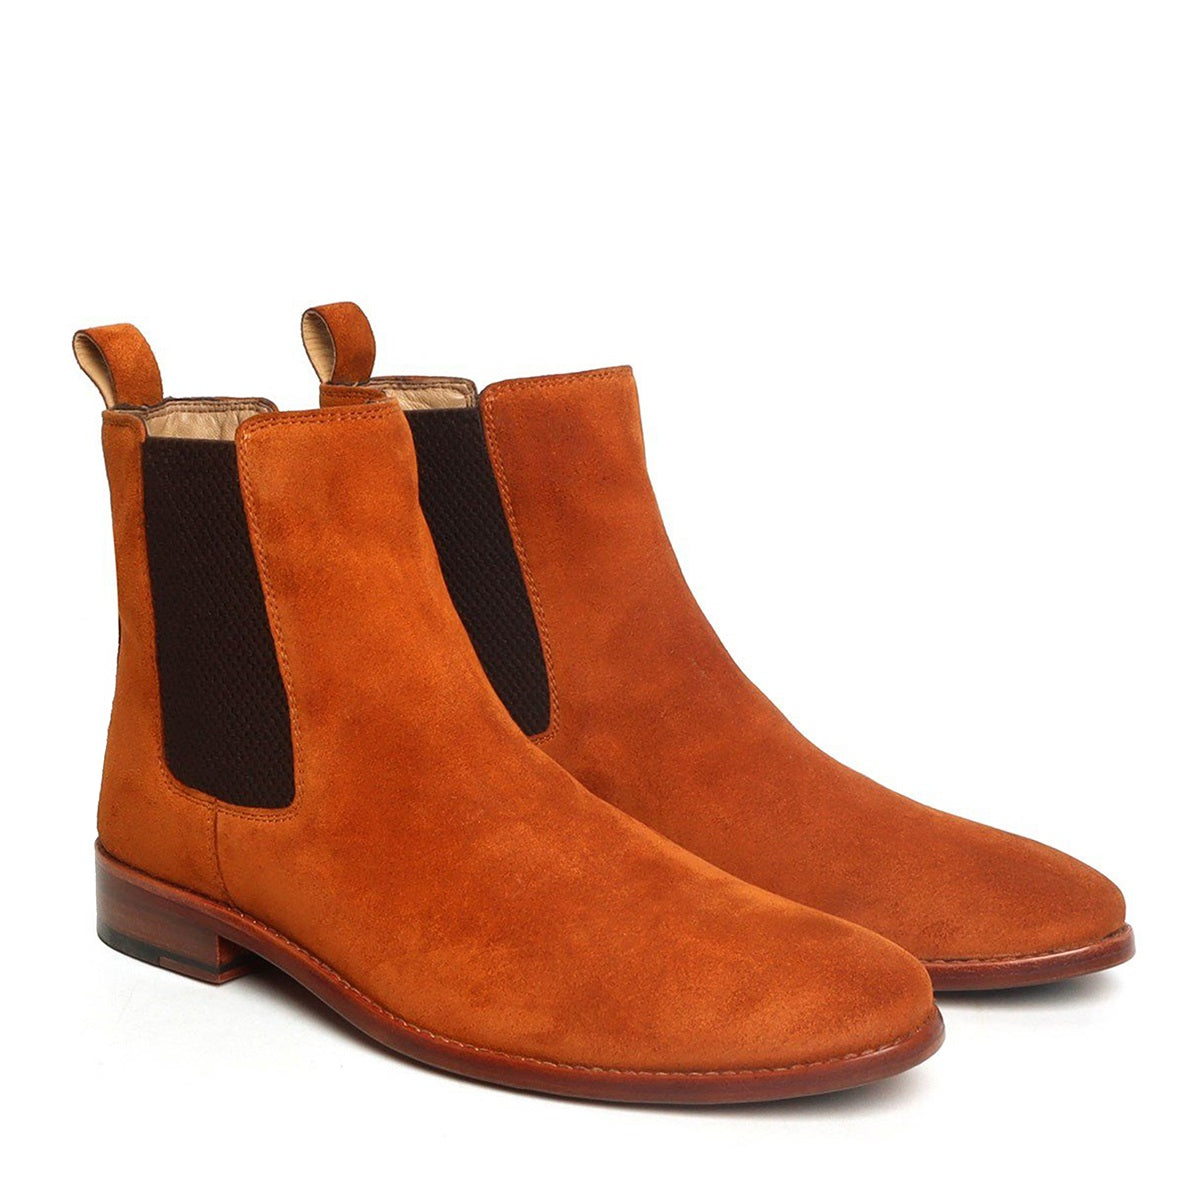 Orangish Tan Suede Leather Hand Made Chelsea Boots For Men By Brune